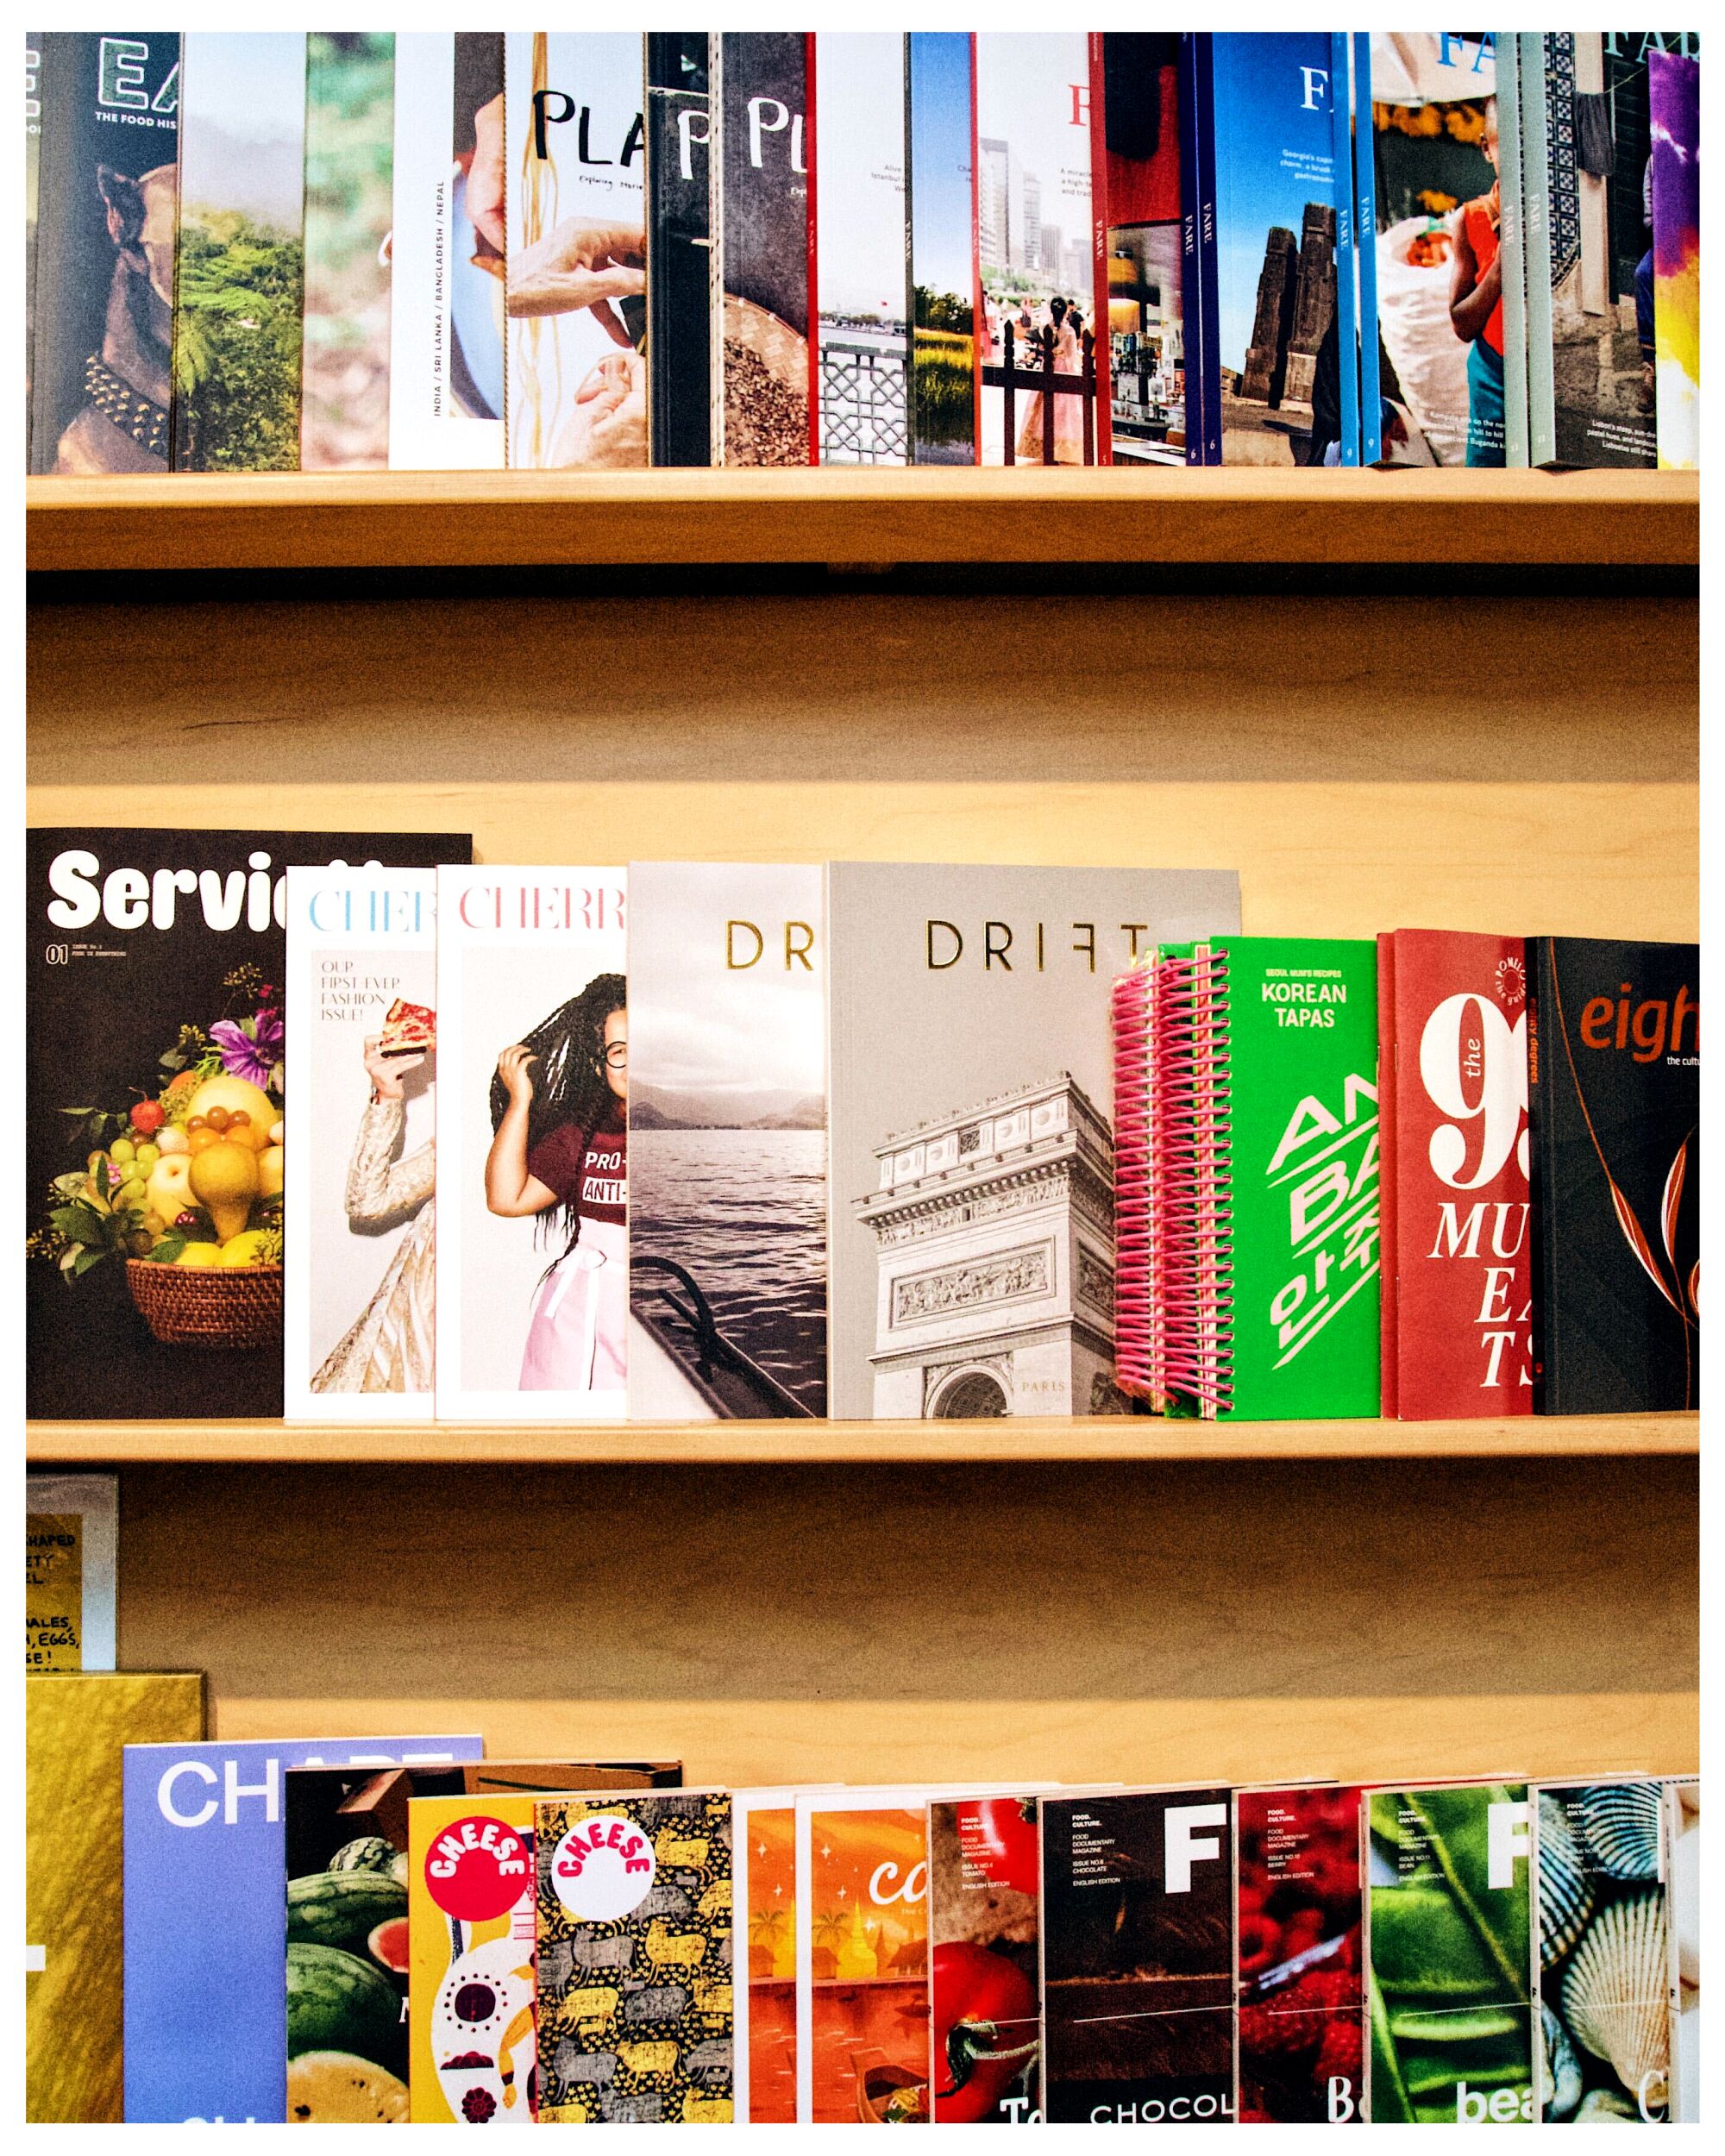 Rows of food magazines on wooden shelves in Now Serving